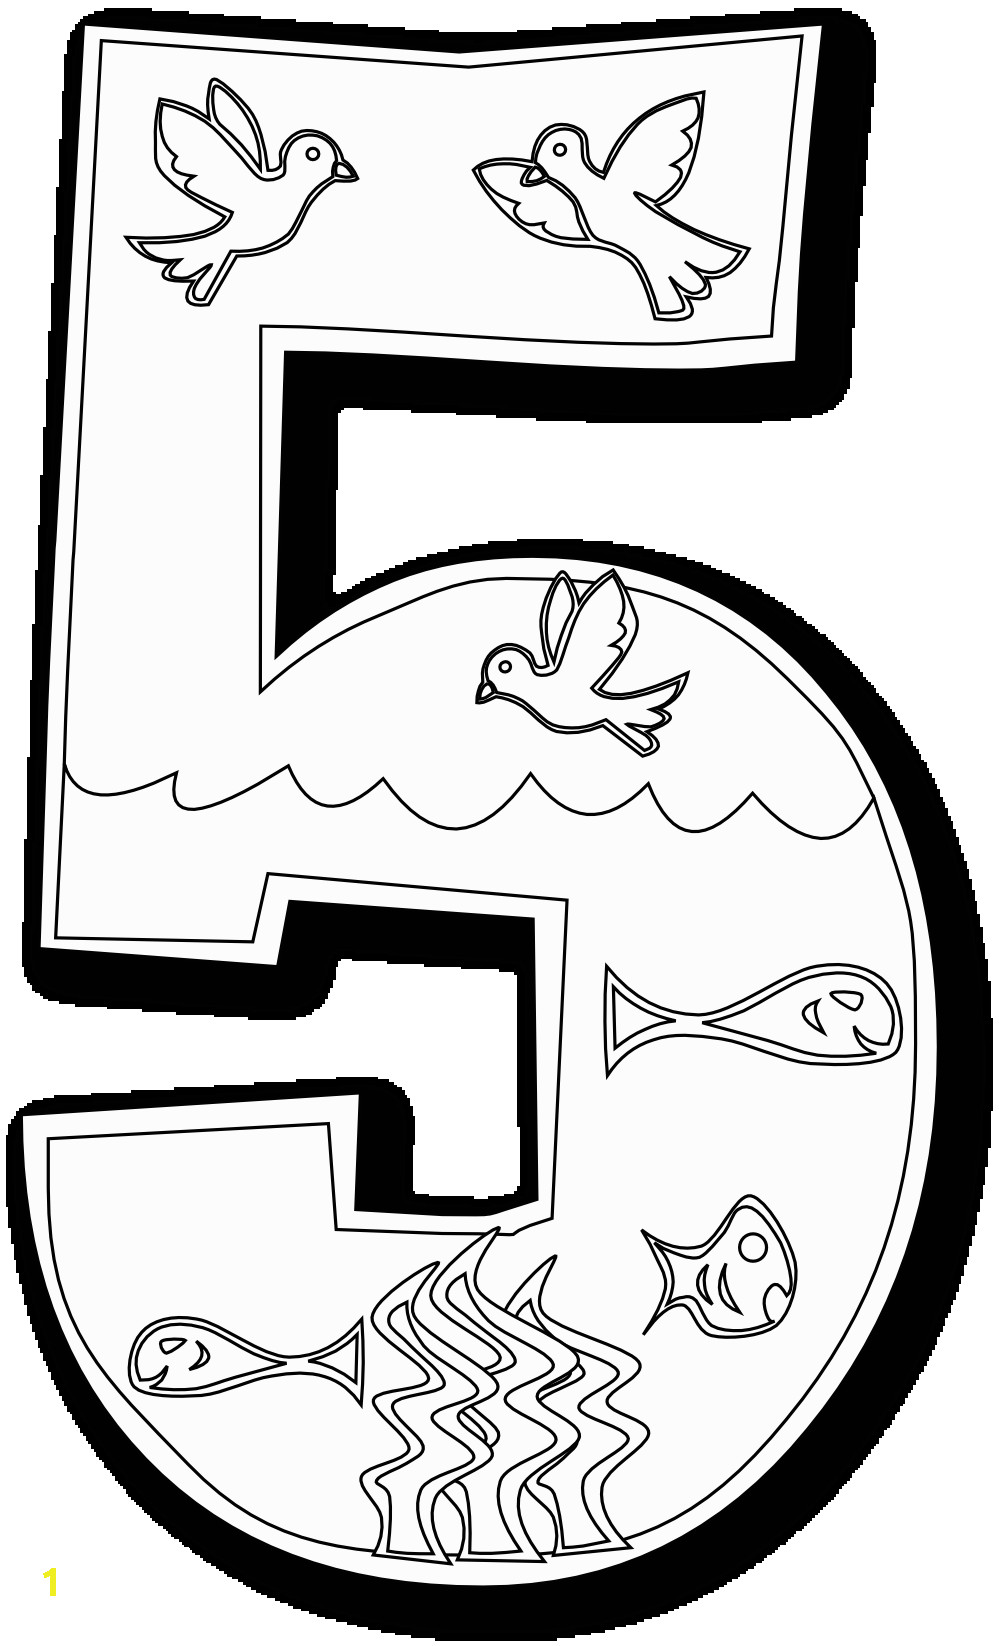 7 Days Of Creation Coloring Pages Coloring Pages for Children is A Wonderful Activity that